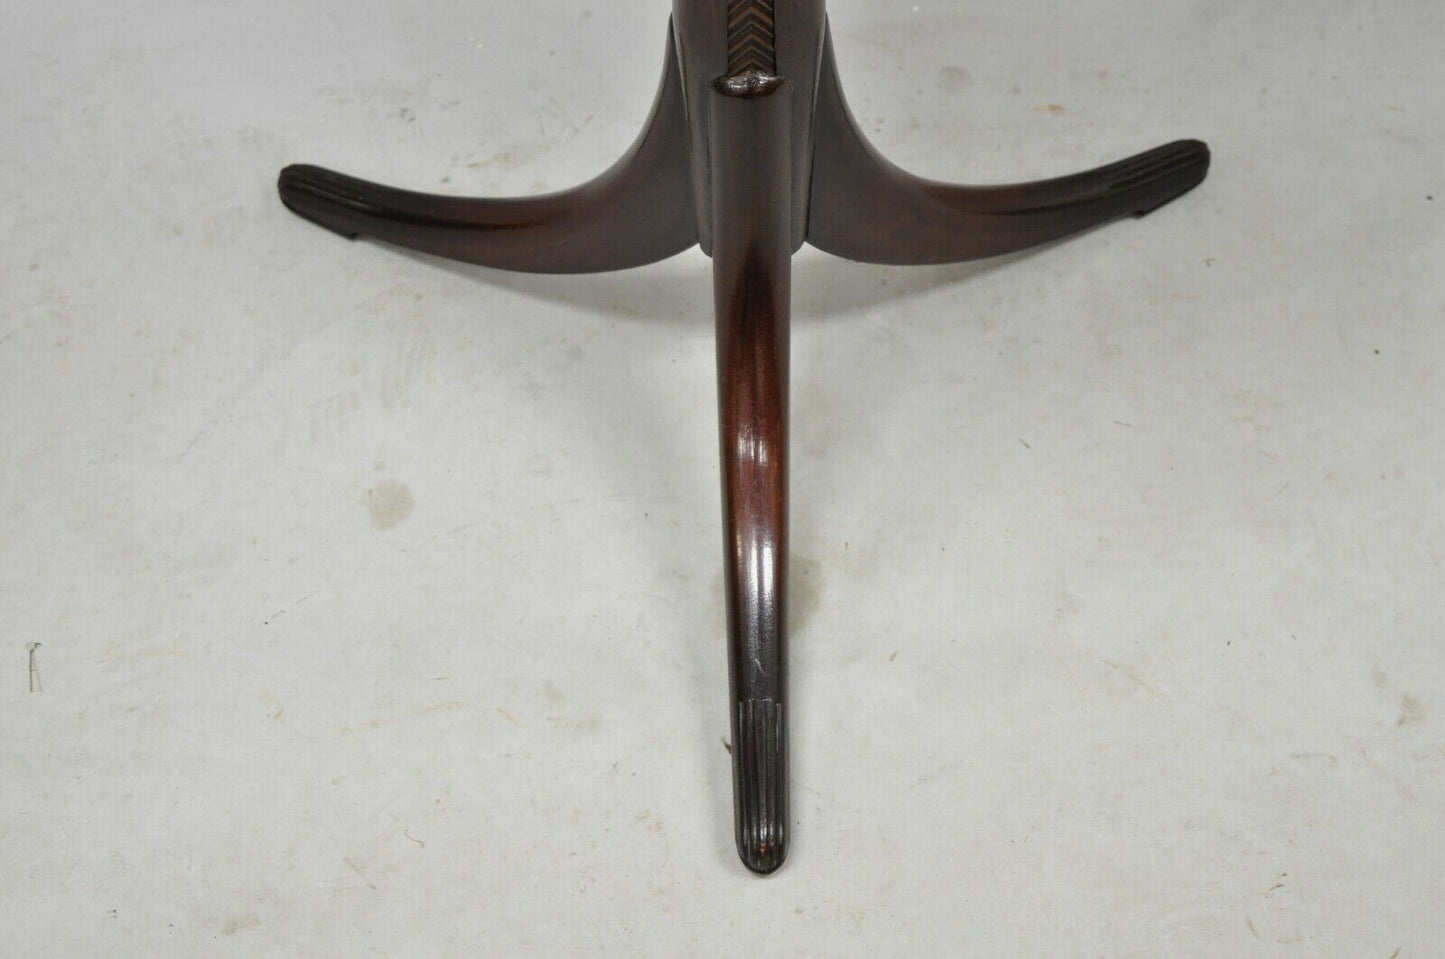 Antique French Art Deco Carved Tripod Base Mahogany Side Table